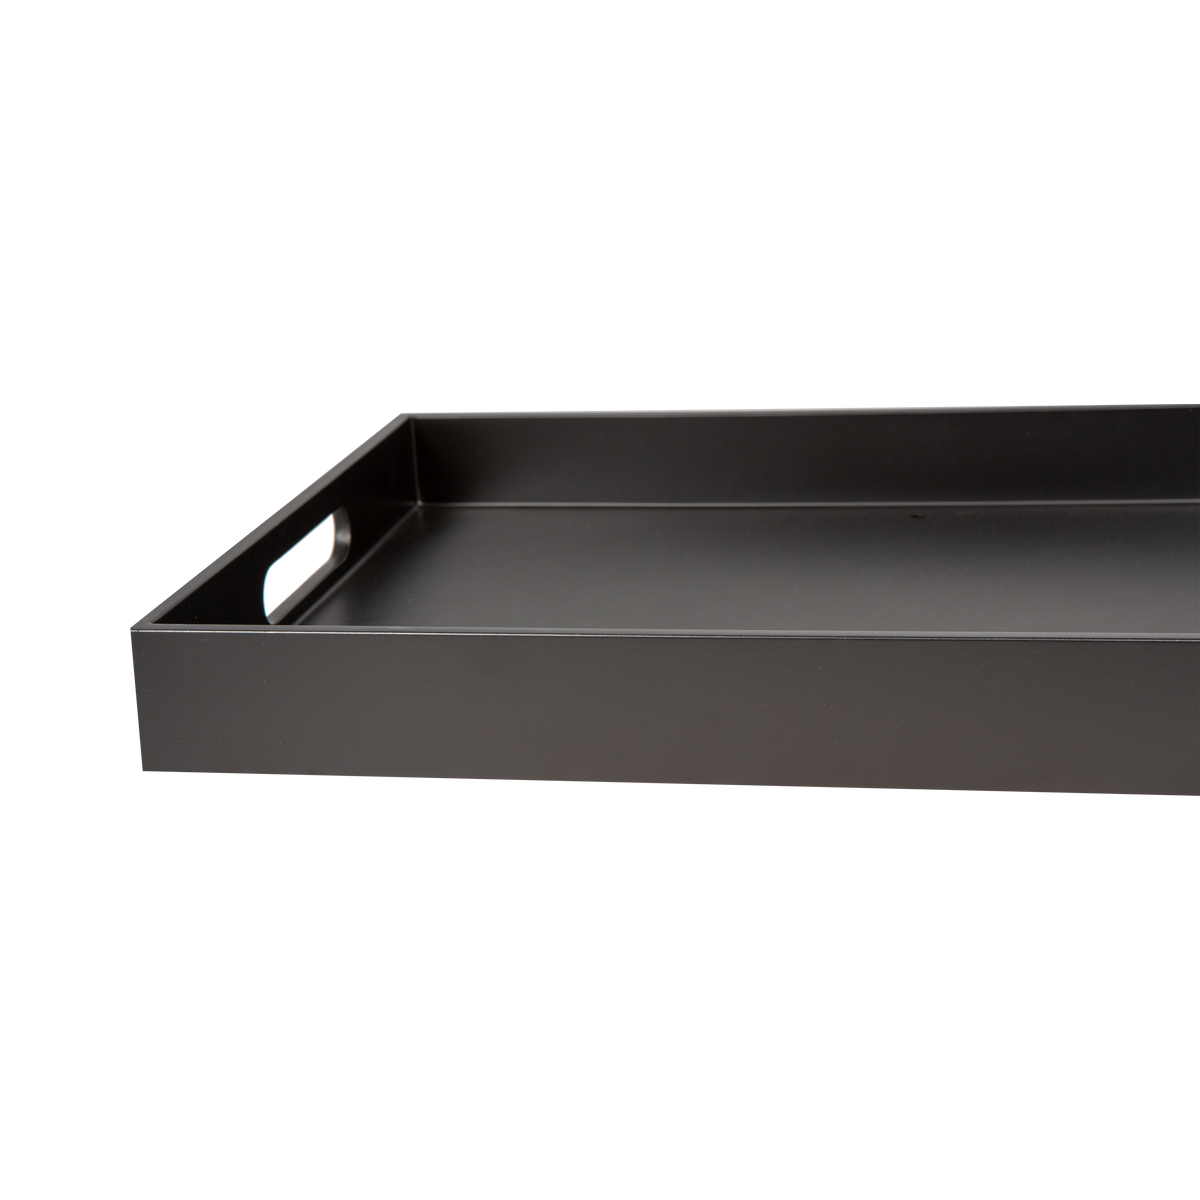 Ferris Lacquer Tray features a modern matte black finish and is available in two sizes.